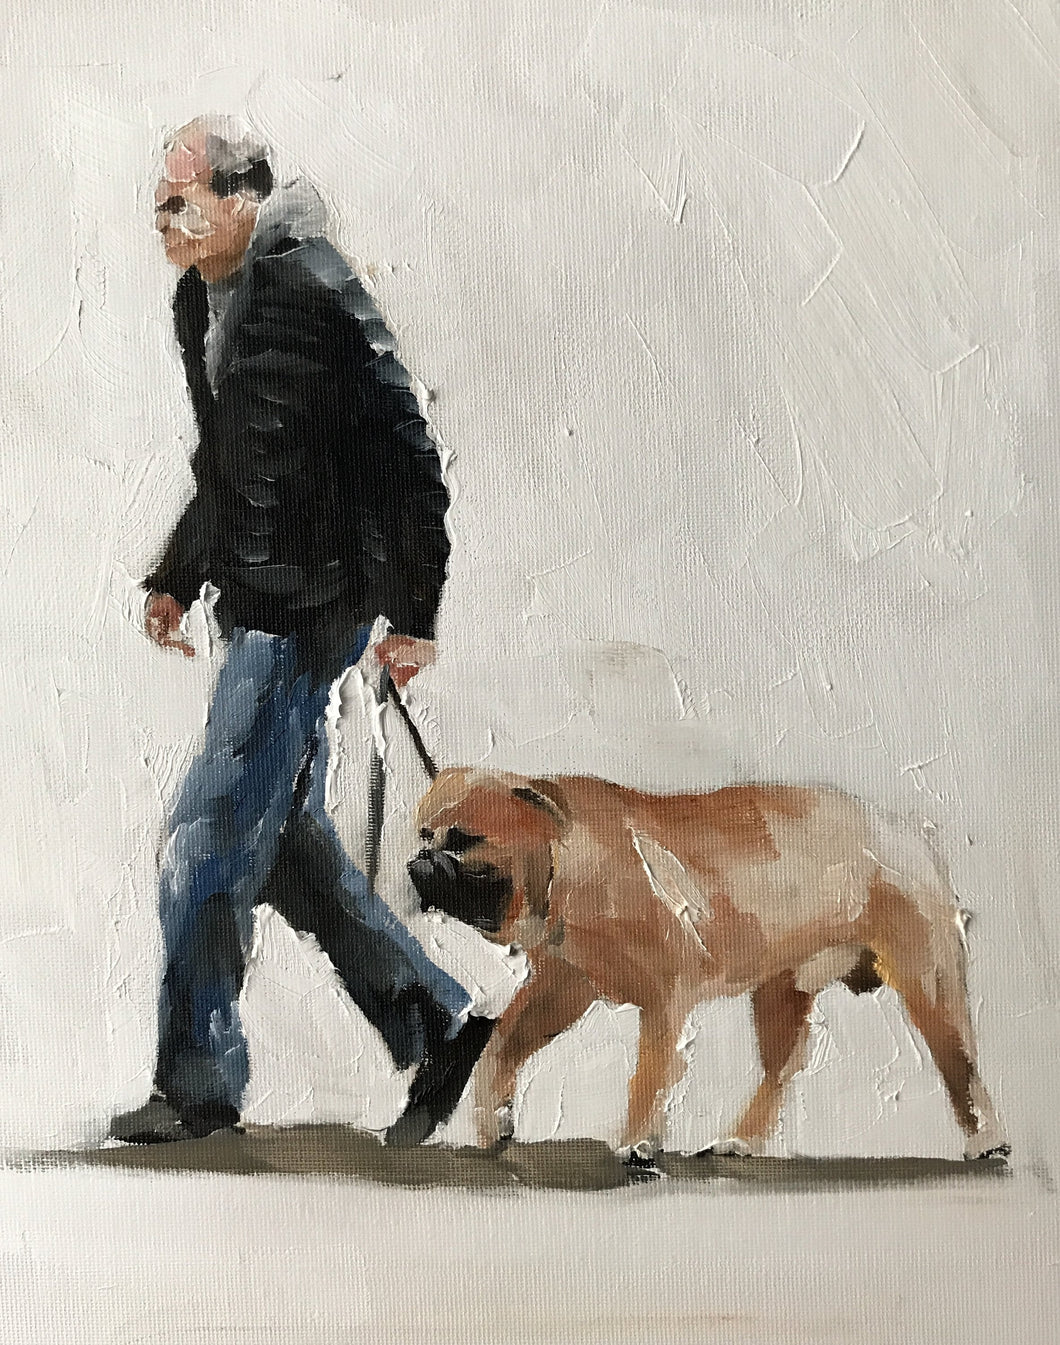 Dog Painting, Dog art, walking Dog Print, Fine Art,  from original oil painting by James Coates